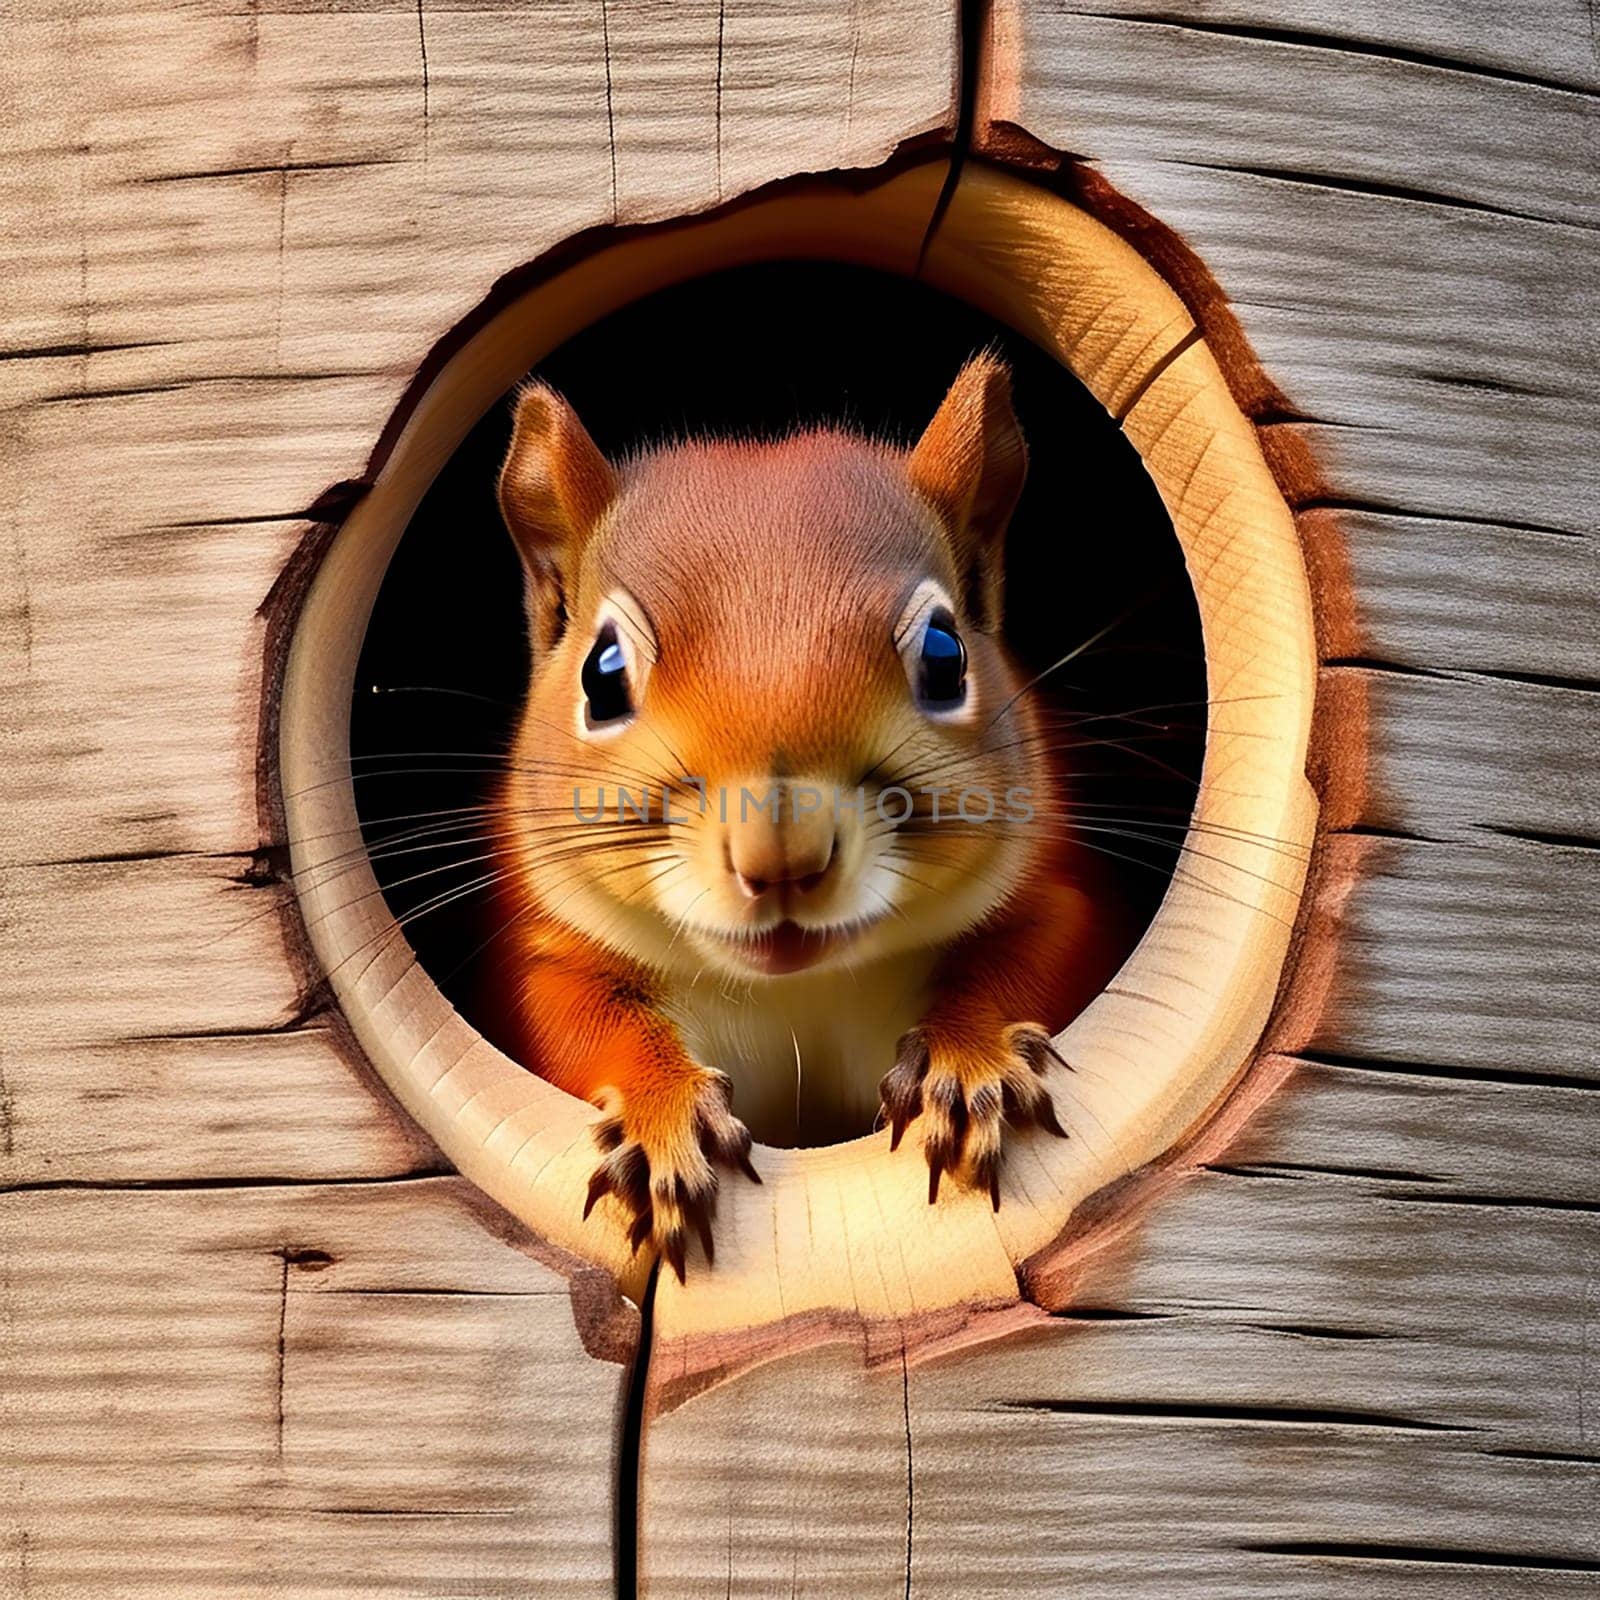 Baby Red Squirrel Peeking Out of Wood Hole by Petrichor